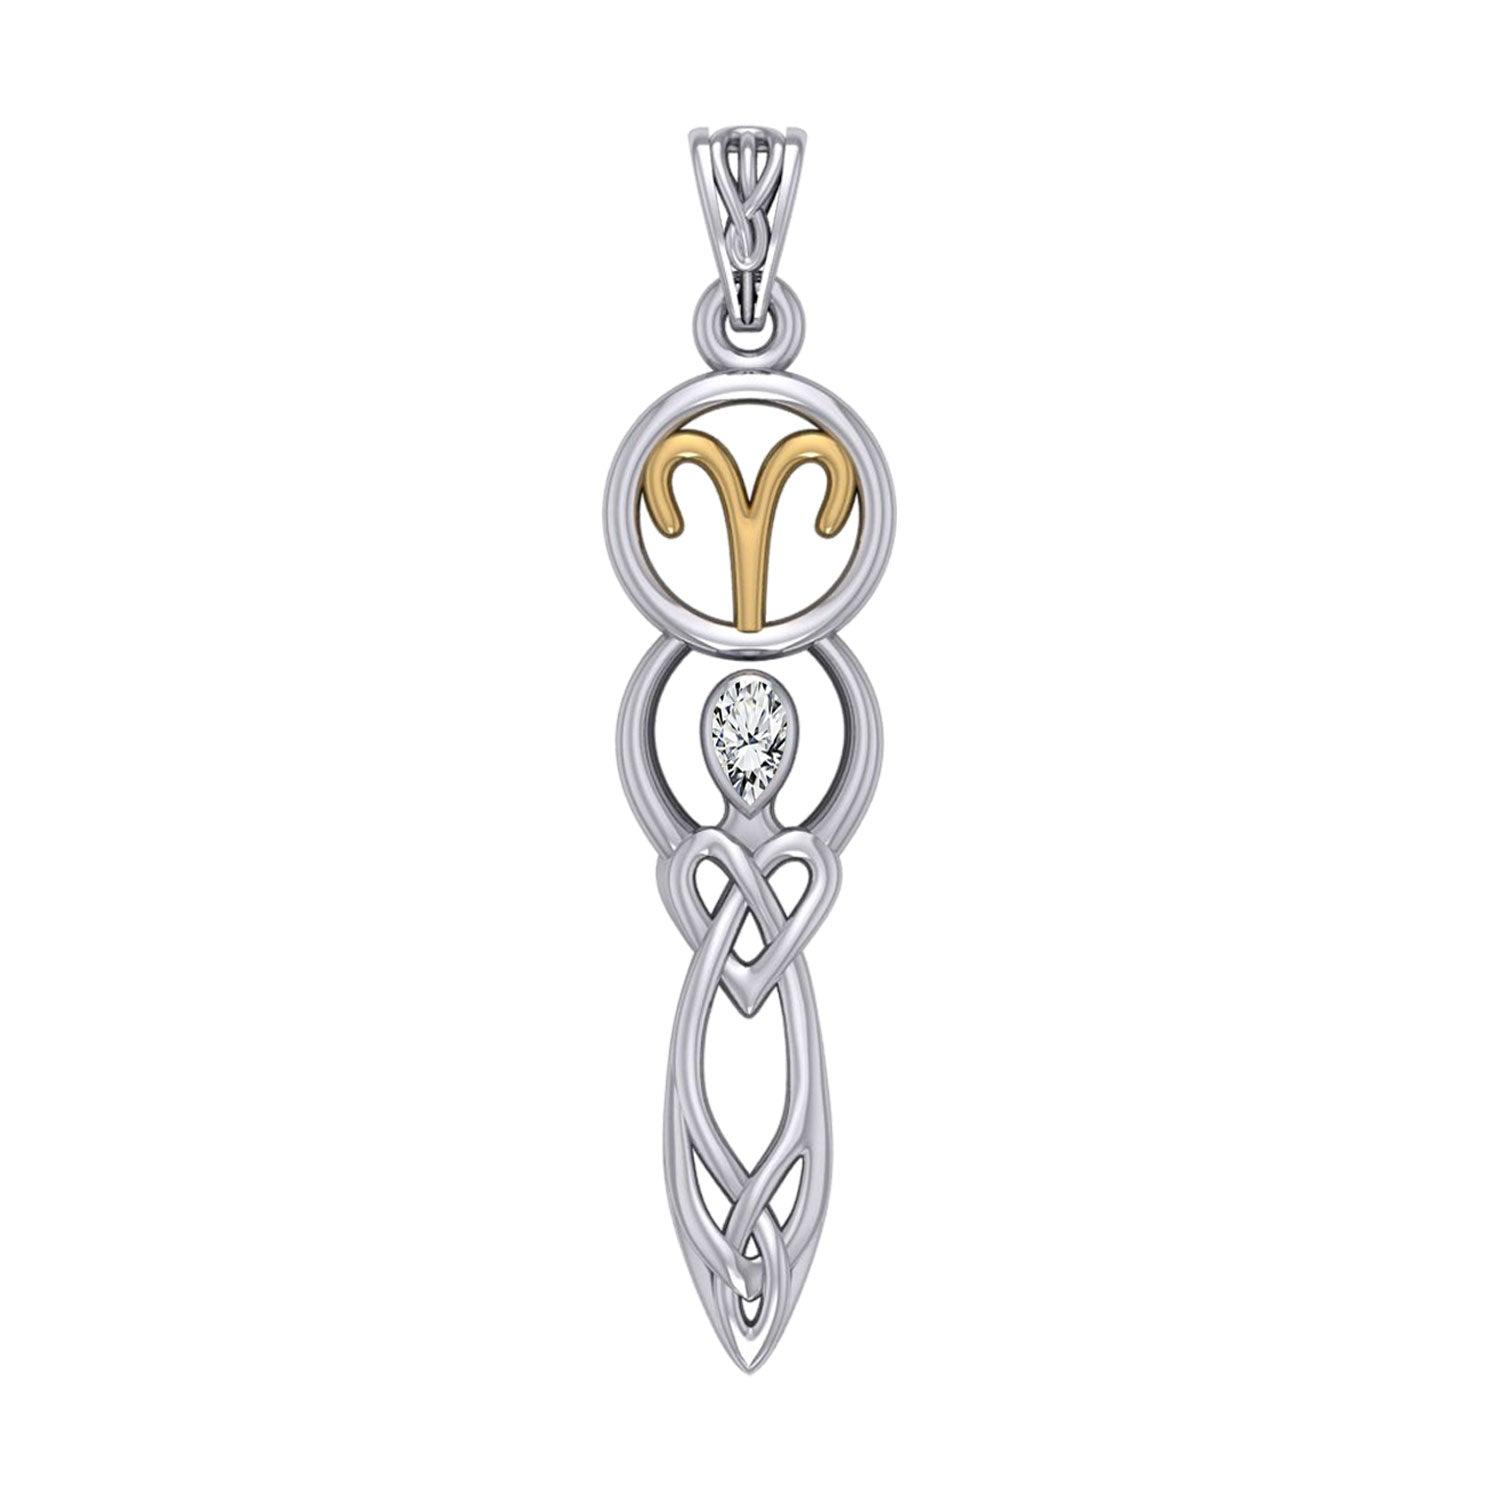 Celtic Goddess Aries Astrology Zodiac Sign Silver and Gold Accents Pendant with White Stone MPD5935 - peterstone.dropshipping